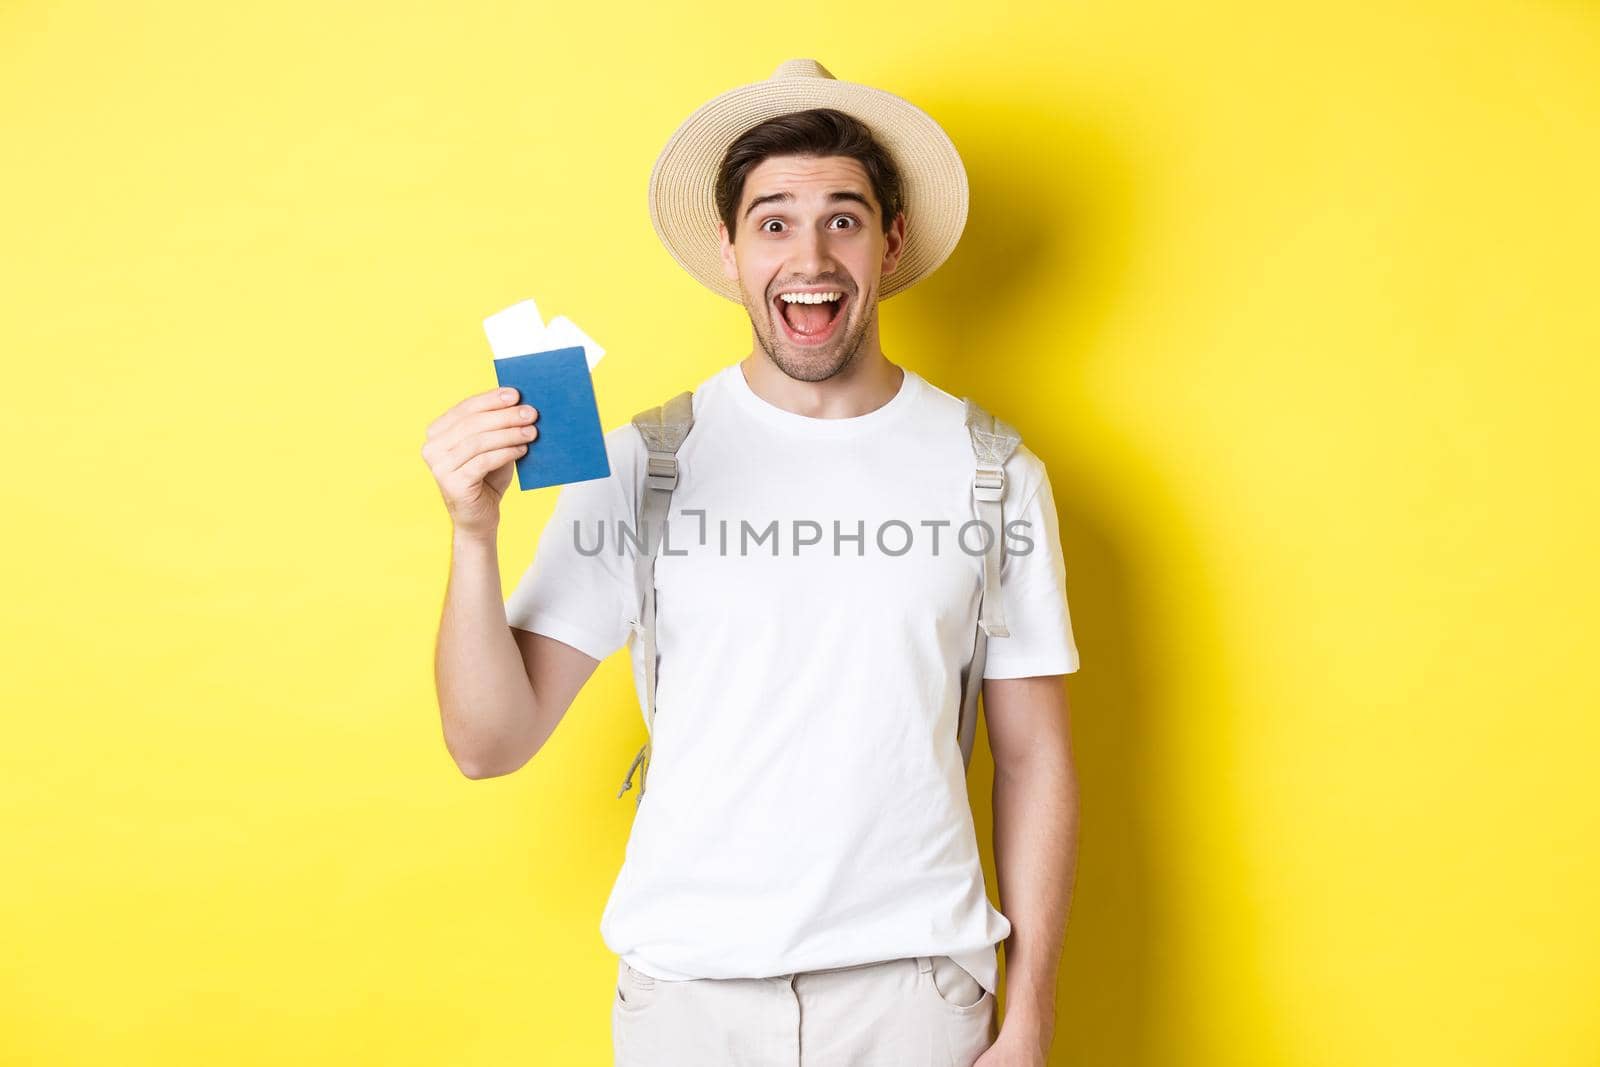 Tourism and vacation. Happy man tourist showing his passport with tickets, going on journey, standing over yellow background with backpack.